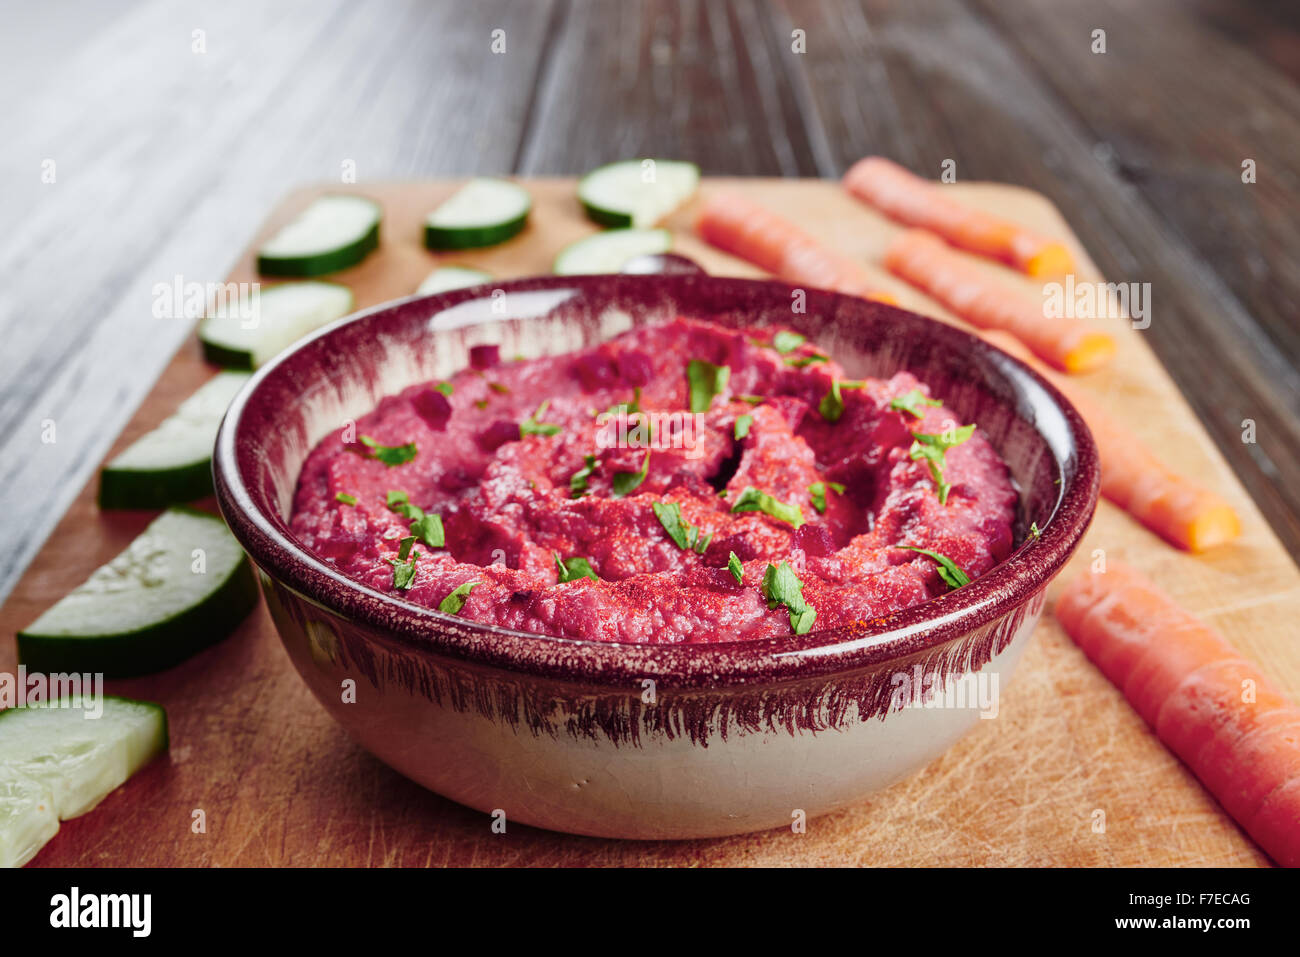 Hummus with beetroot in bowl on cutting board, surrounded by carrots and cucumber, on a dark wood table Stock Photo